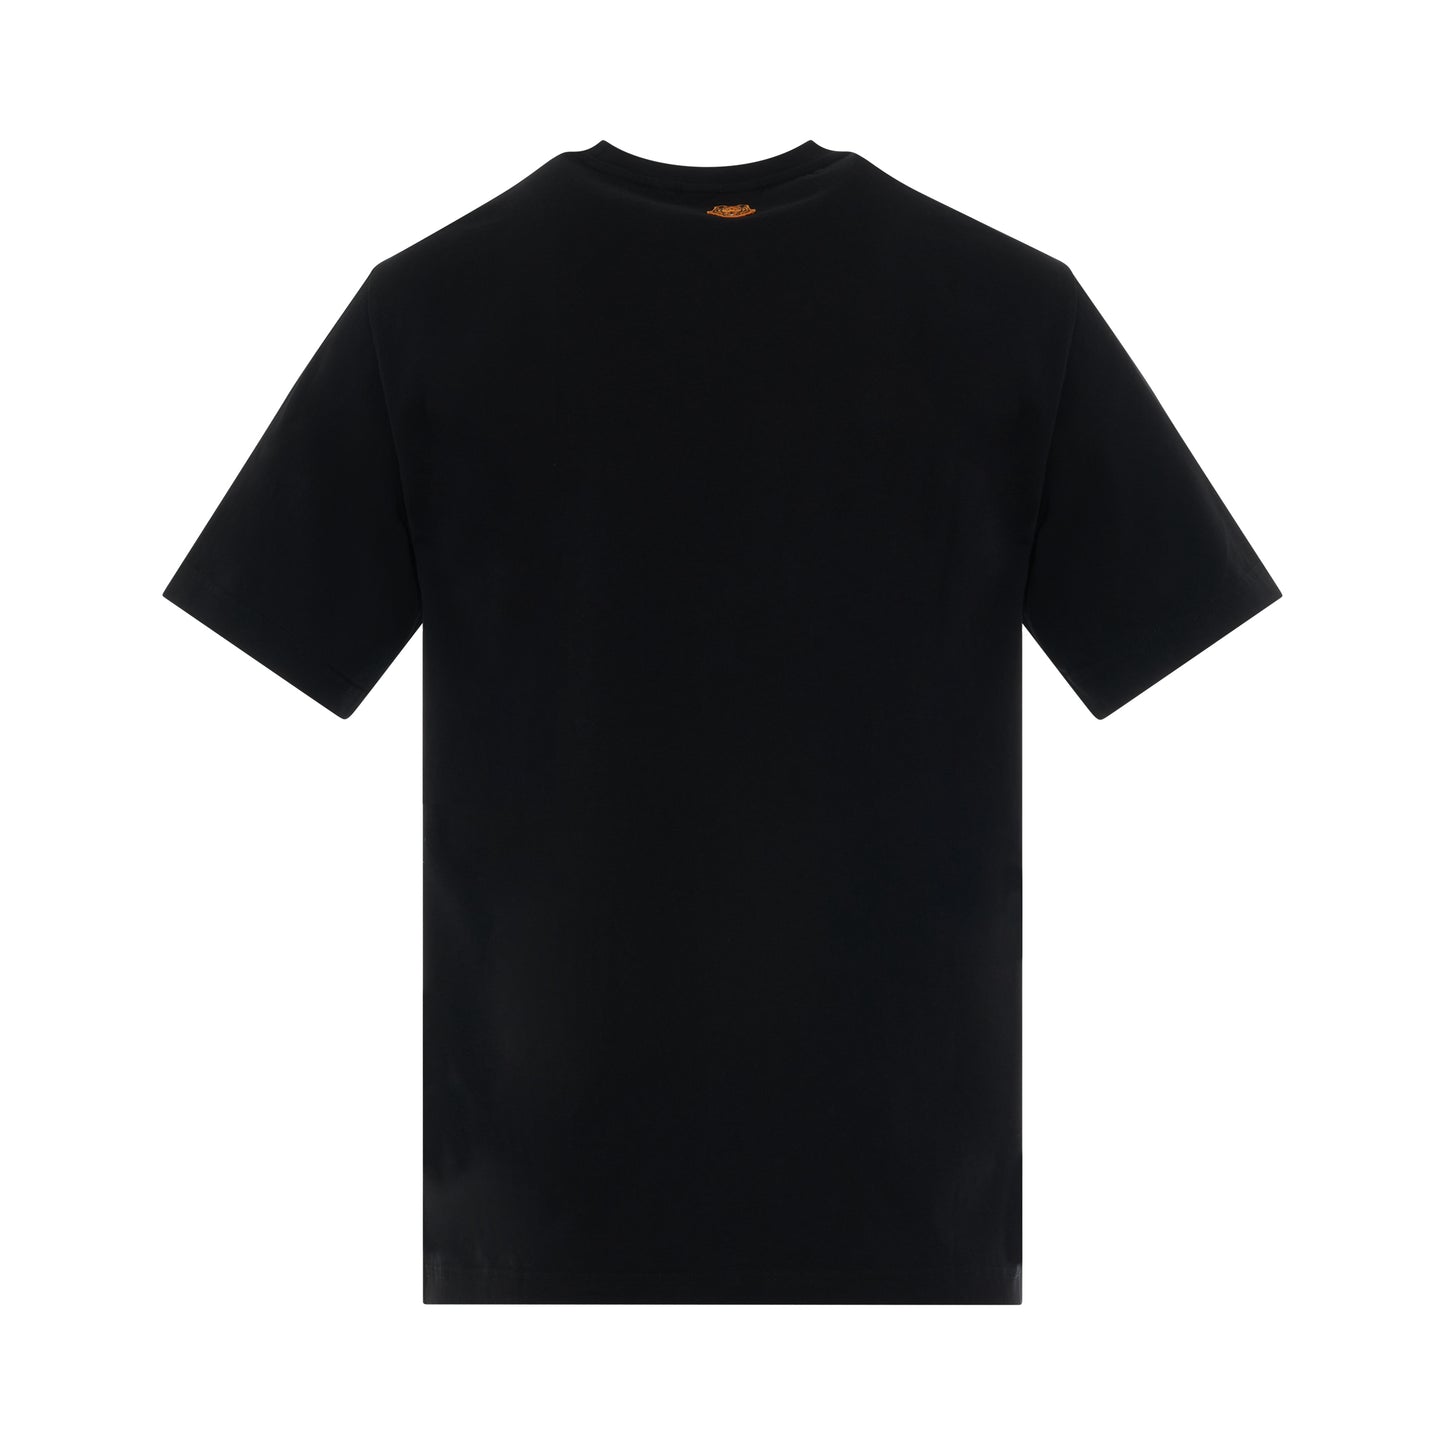 Iconic K-Tiger T-Shirt in Black